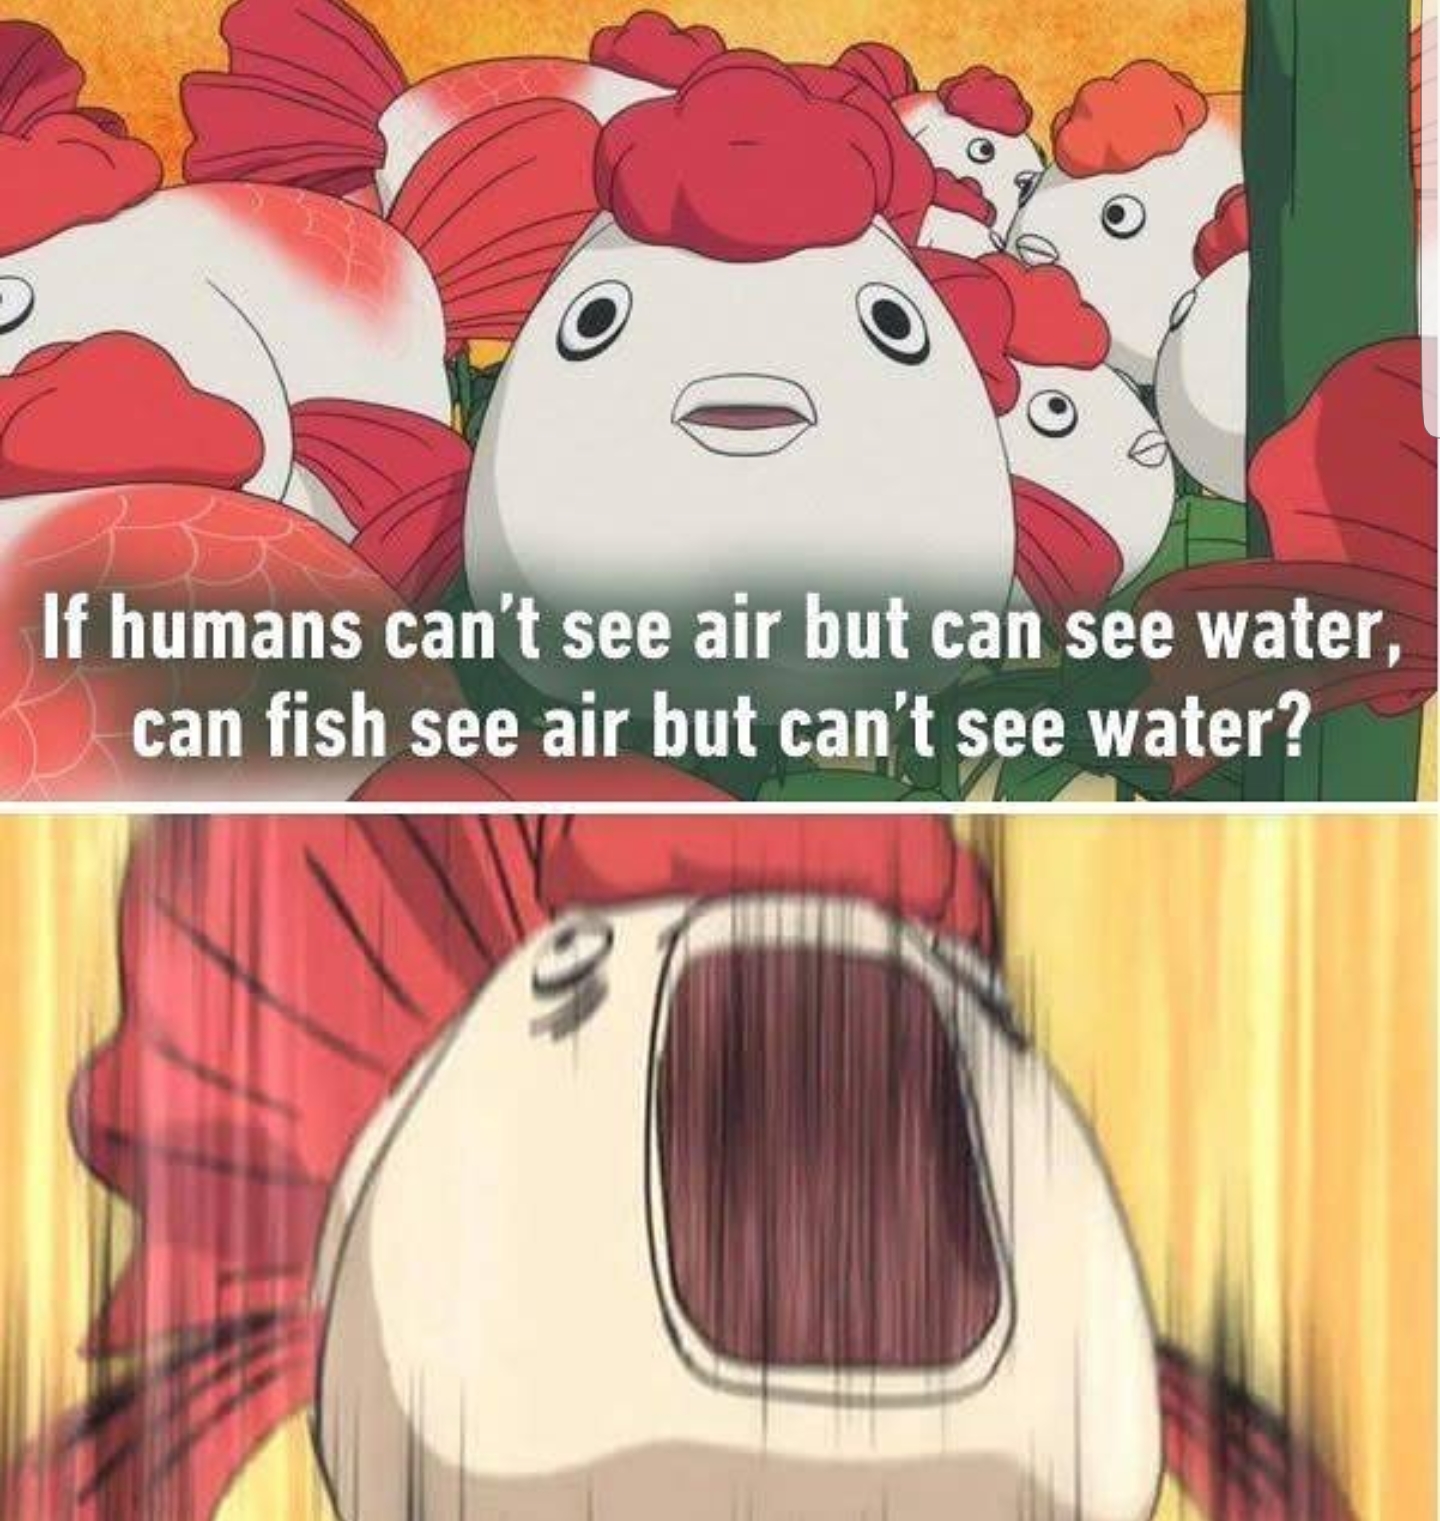 If humans can't see air but can see water, can fish see air but can't see water?